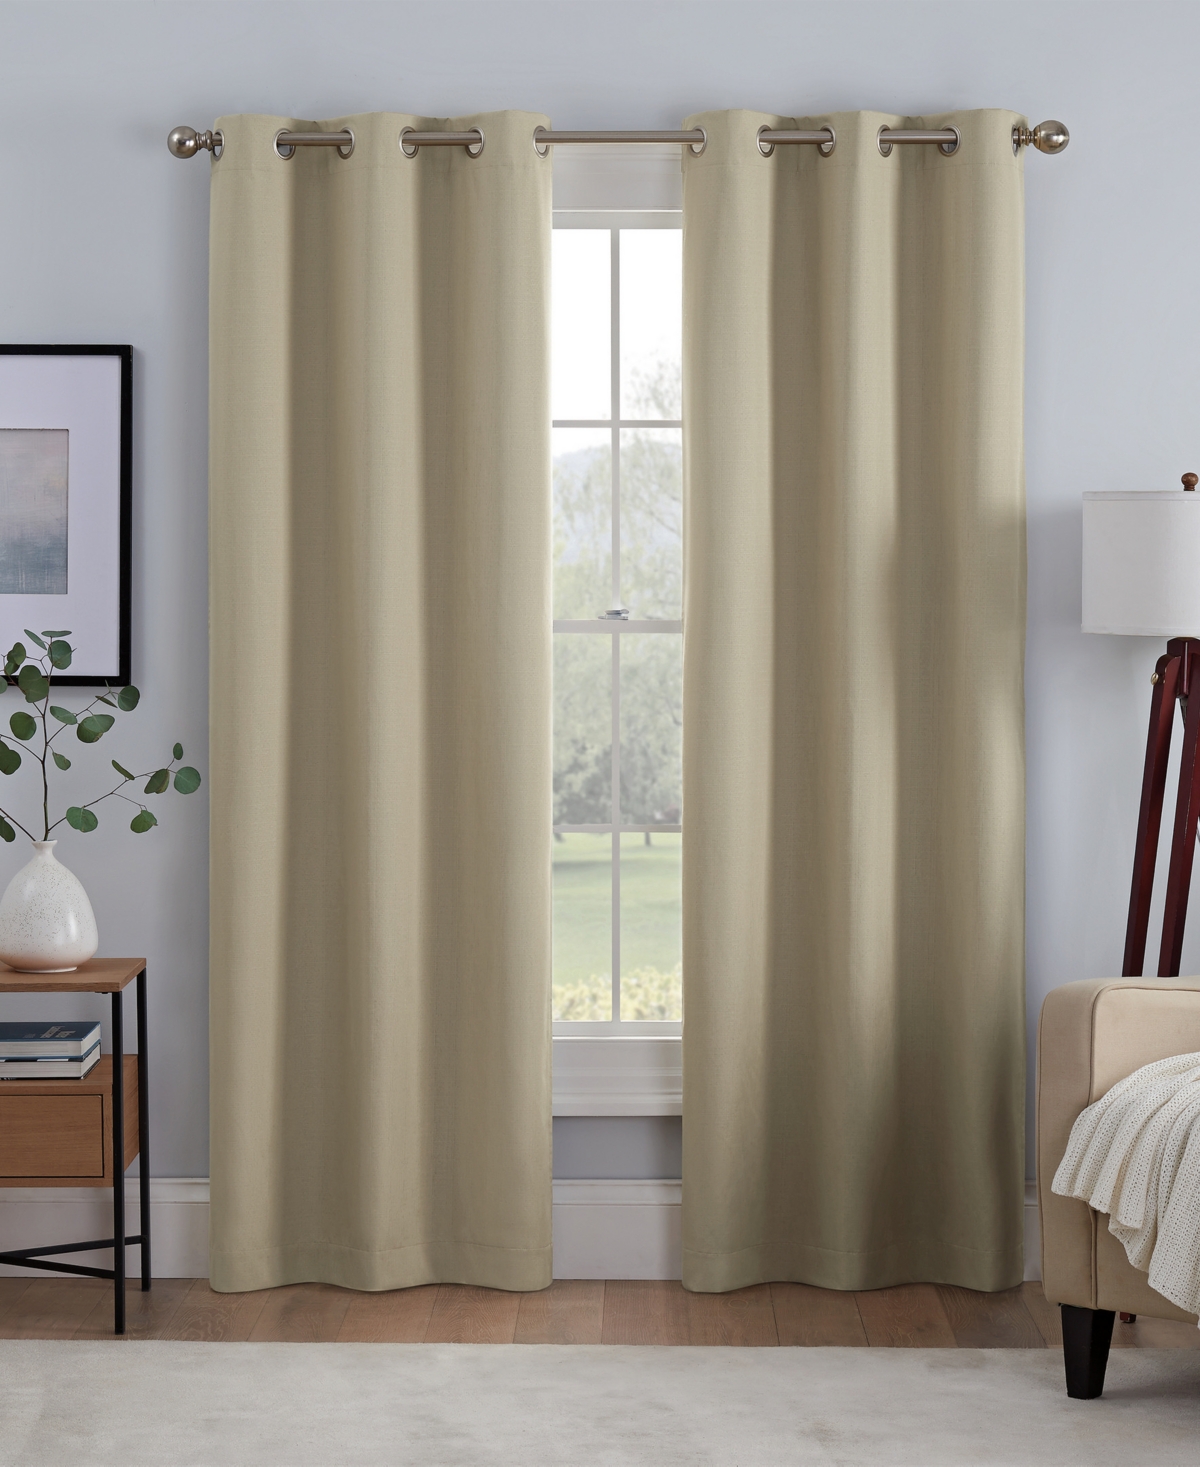 Eclipse Khloe 100% Absolute Zero Blackout Solid Textured Thermaback Curtain Panel, 95" X 40" In Tan